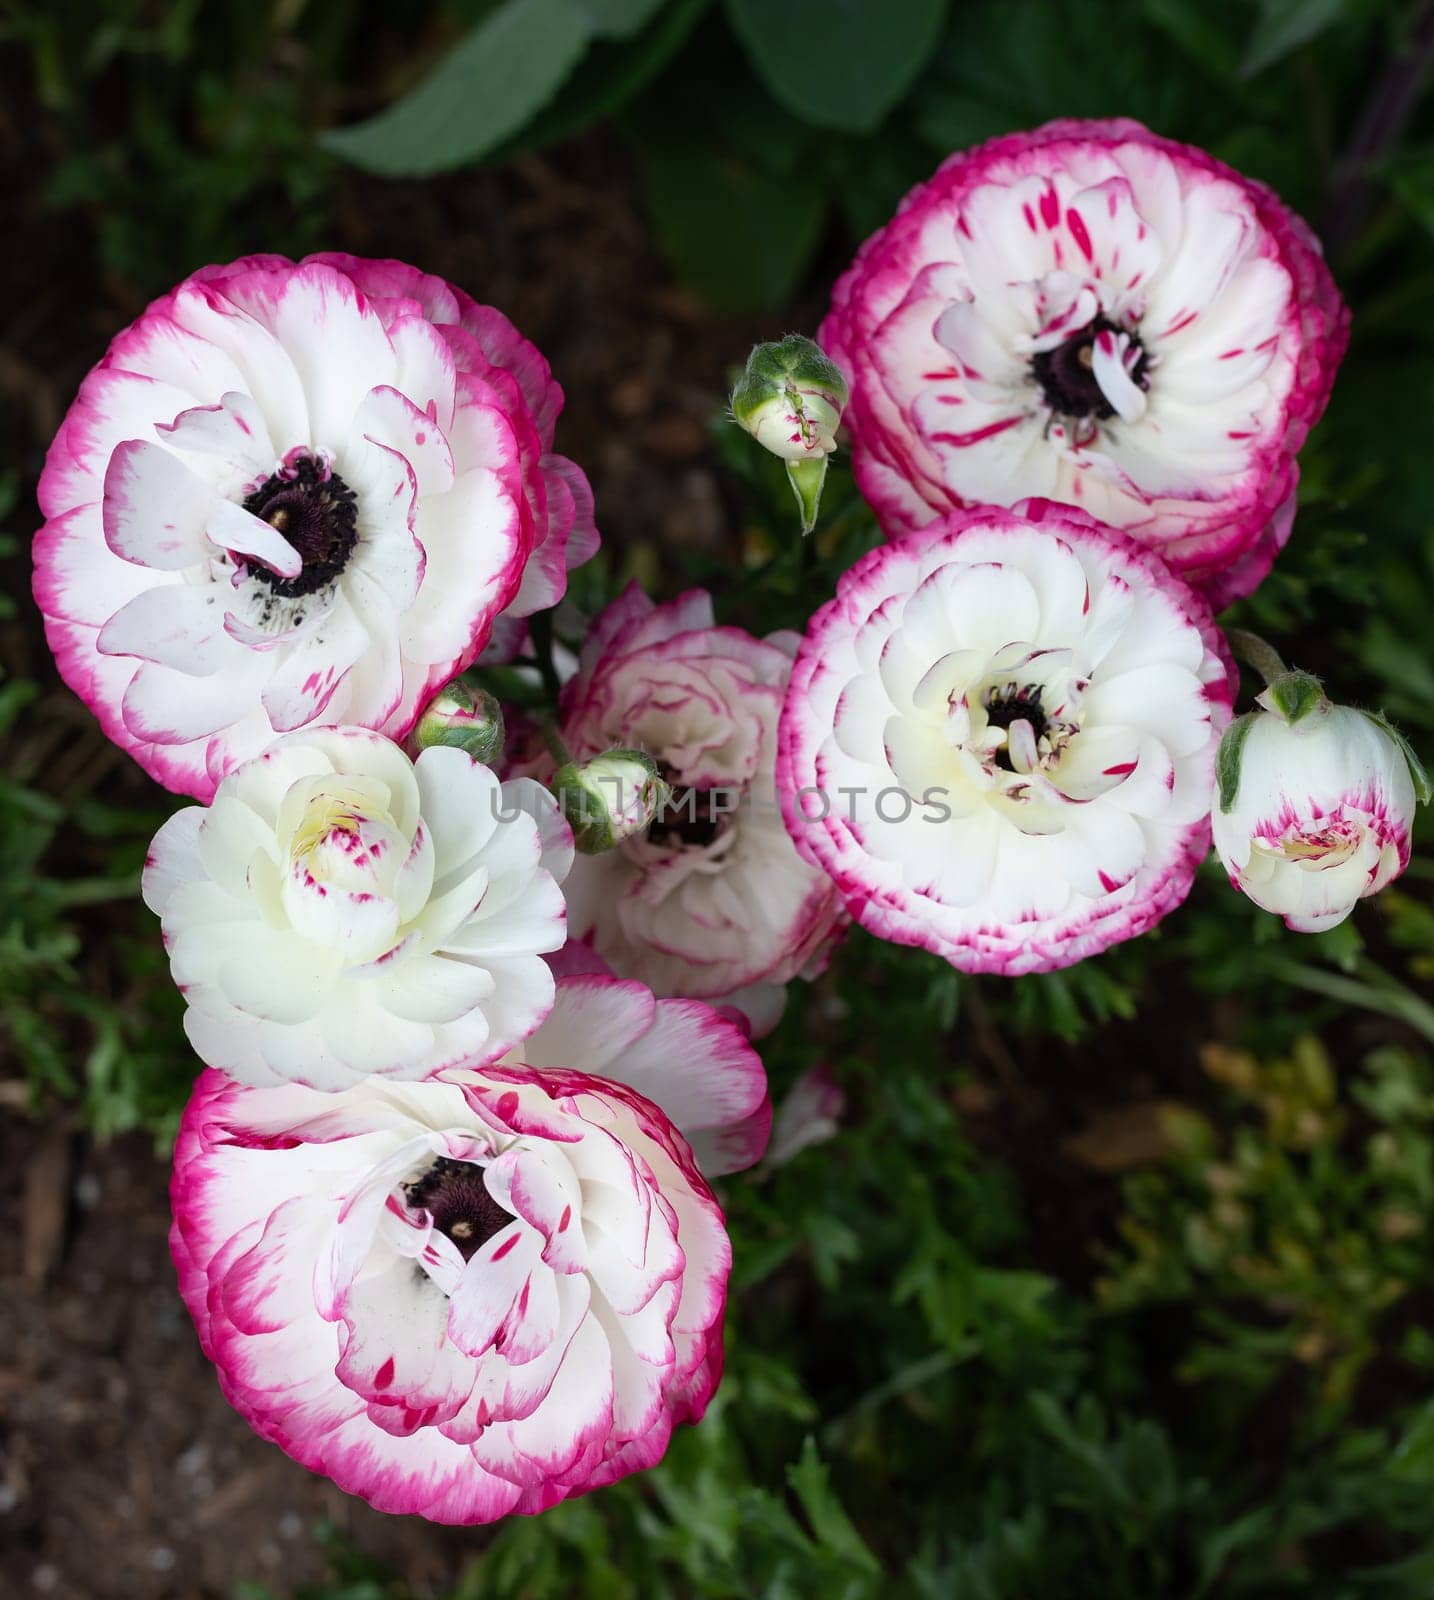 Closeup White And Purple Rimmed Persian Buttercup Flowers Or Ranunculus Asiaticus Outdoors In Garden Or Plant Nursery. Vertical Plane Botany, Floriculture. High Quality Photo by netatsi